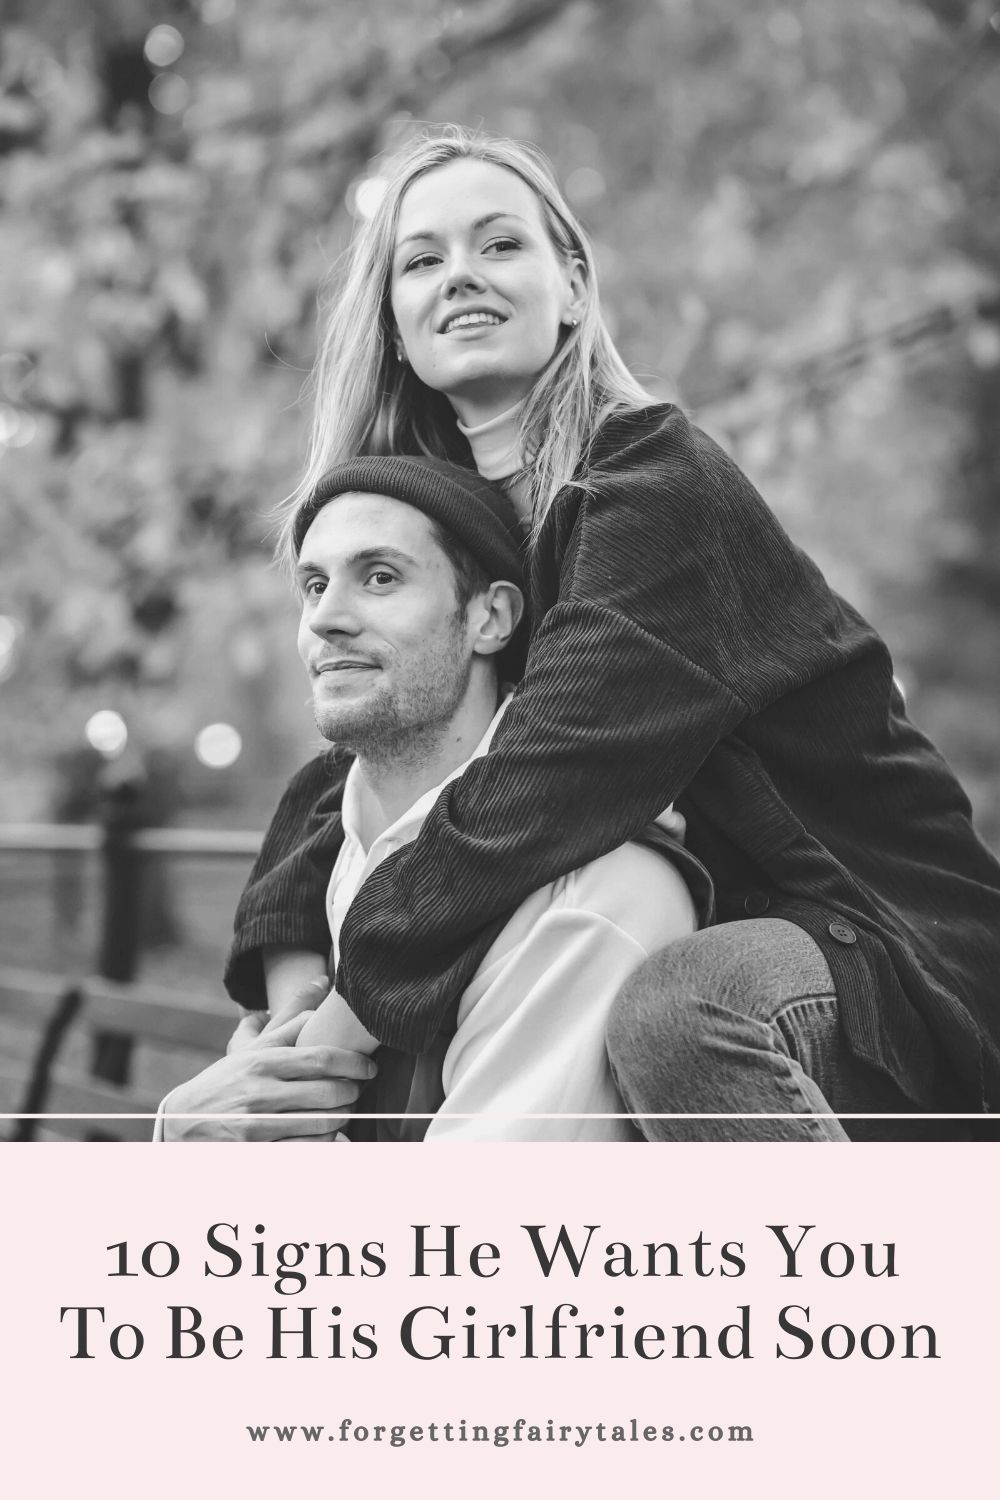 10 Signs He Wants You To Be His Girlfriend Soon | He'll Ask You Out